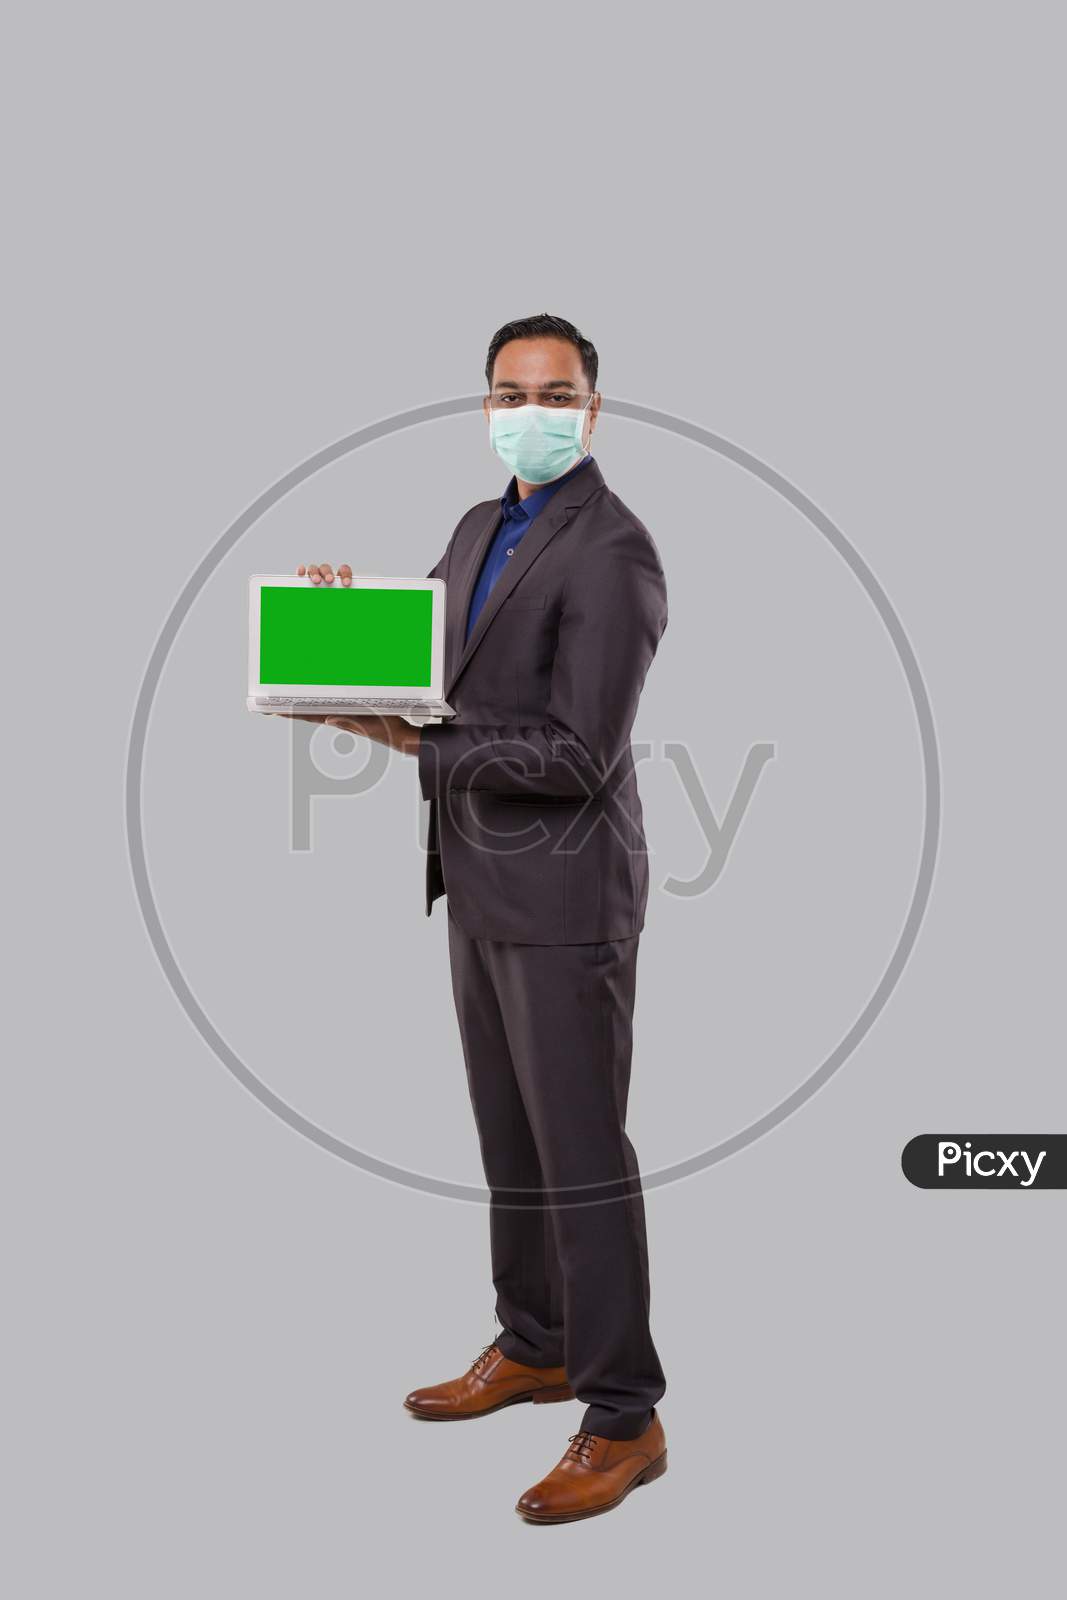 Businessman Showing Laptop Green Screen Isolated Wearing Medical Mask And Gloves. Indian Business Man With Laptop In Hands. Online Business Concept